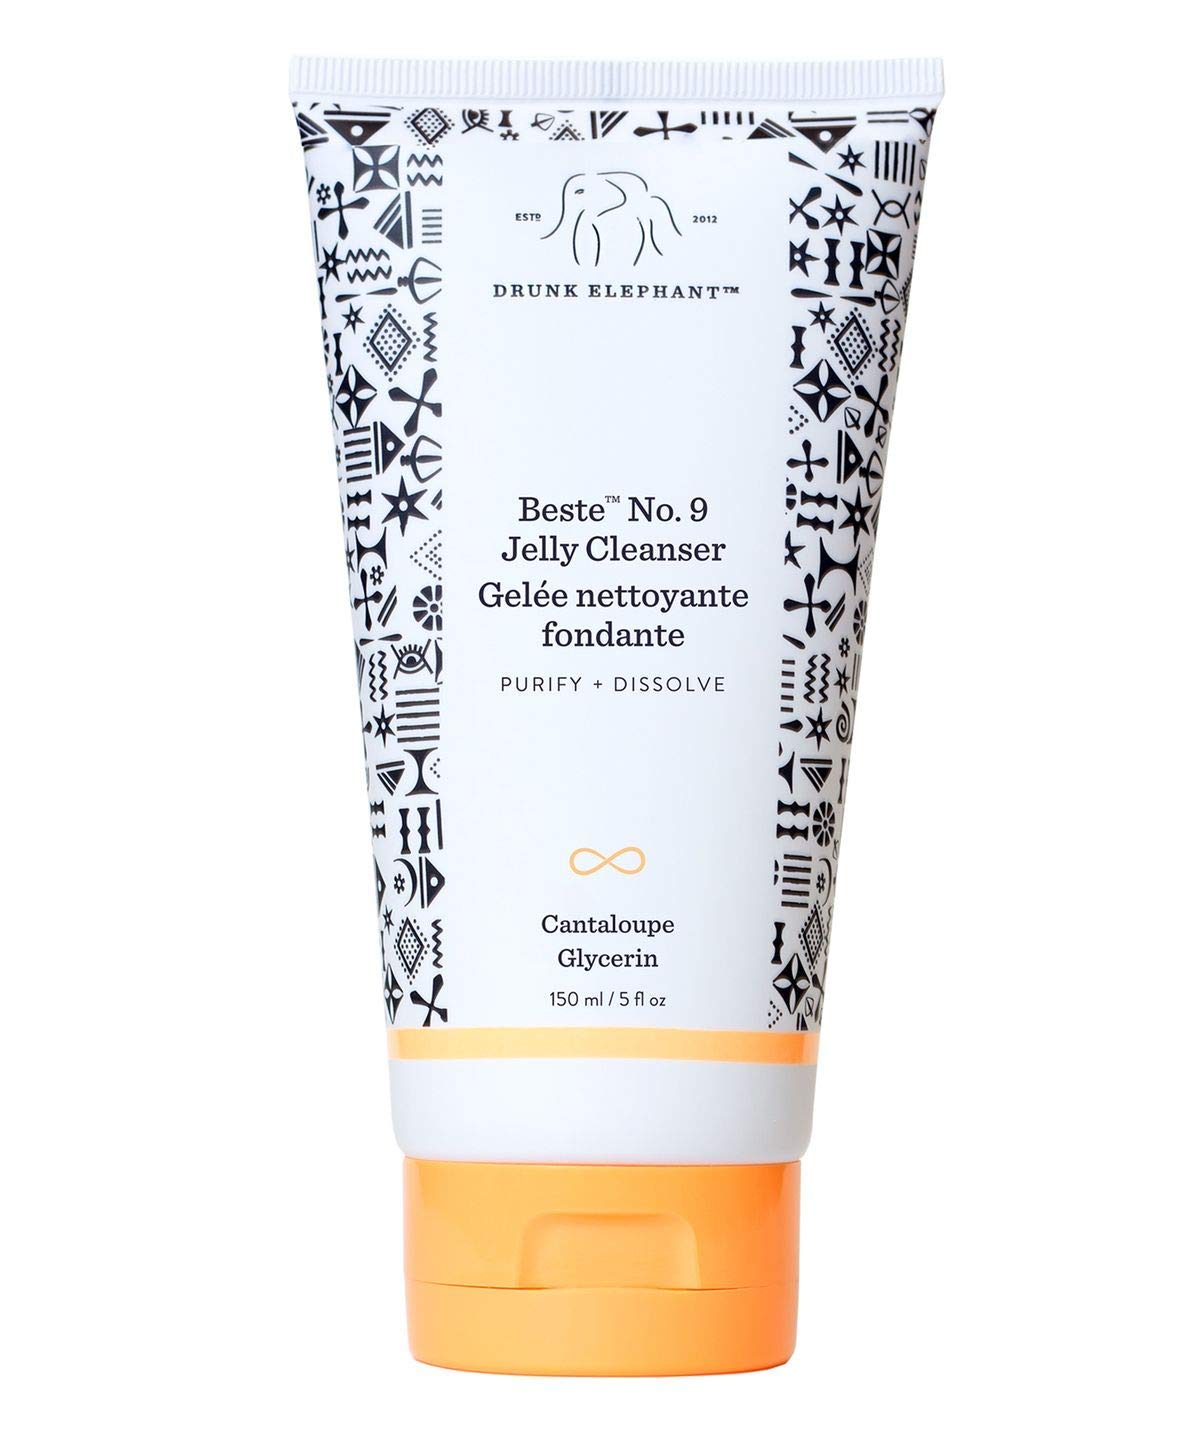 Picture of product being reviewed:  Drunk Elephant Beste No. Jelly Cleanser